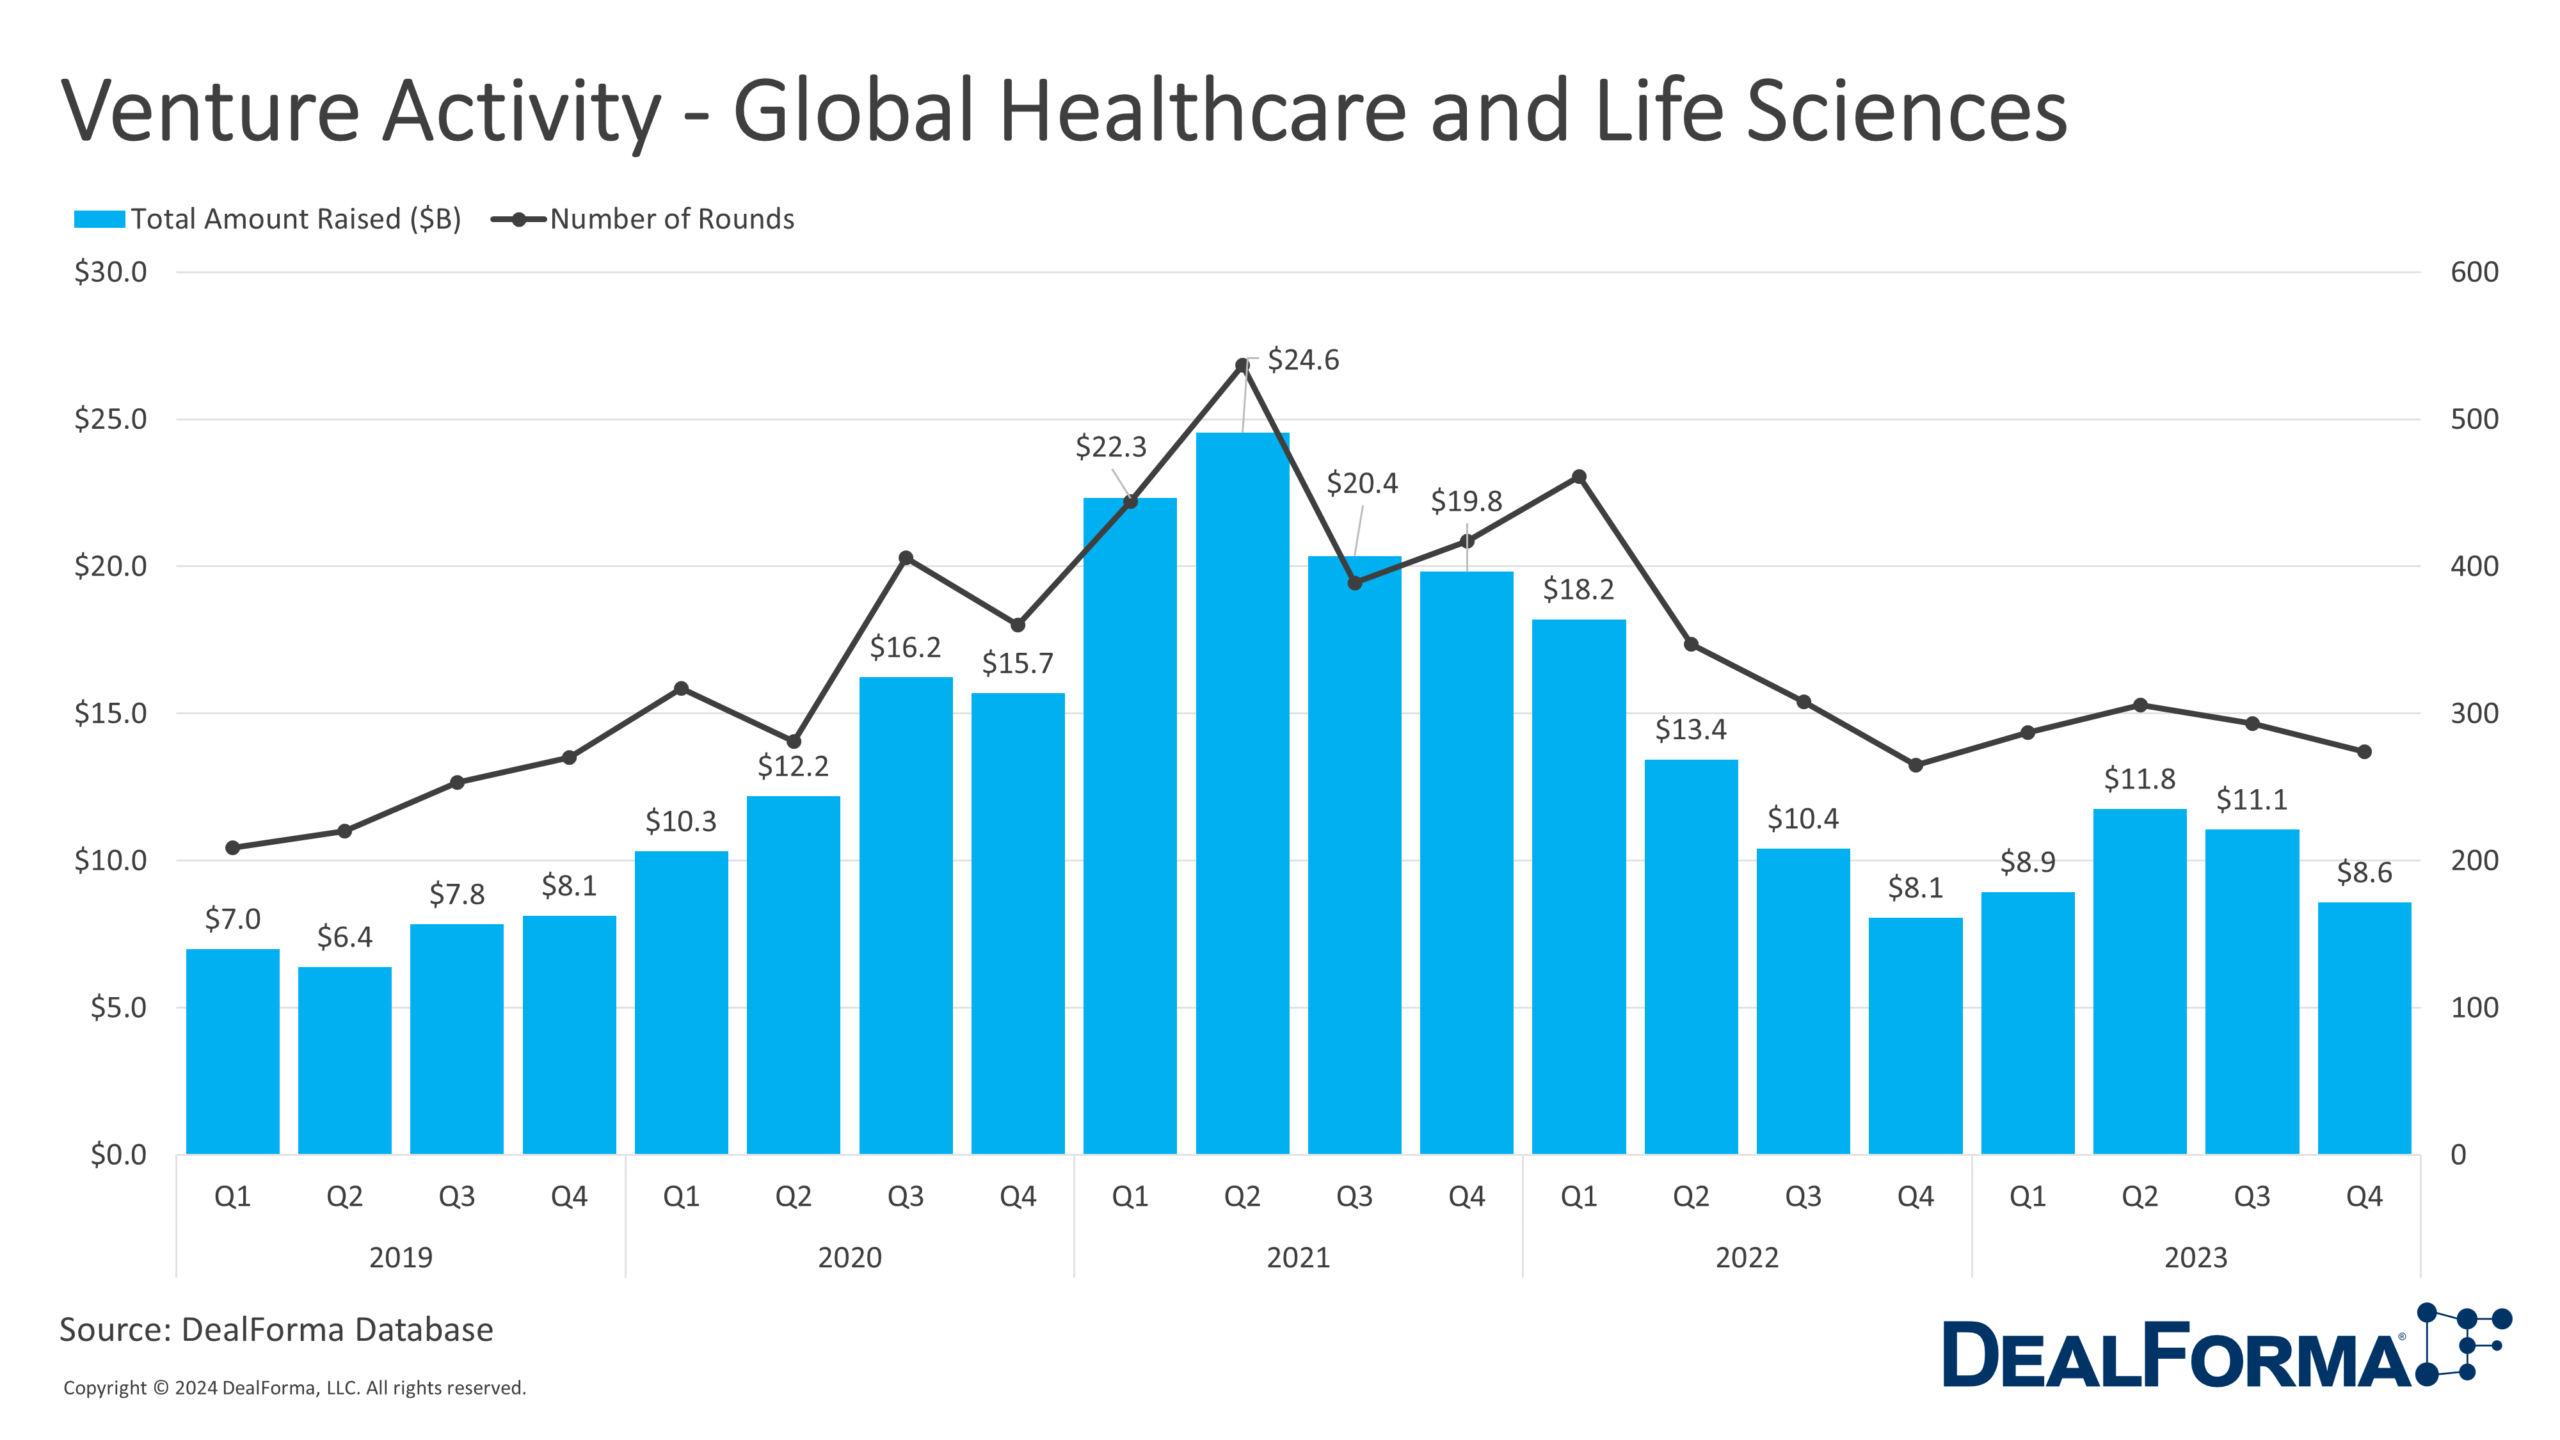 Venture Activity - Global Healthcare and Life Sciences